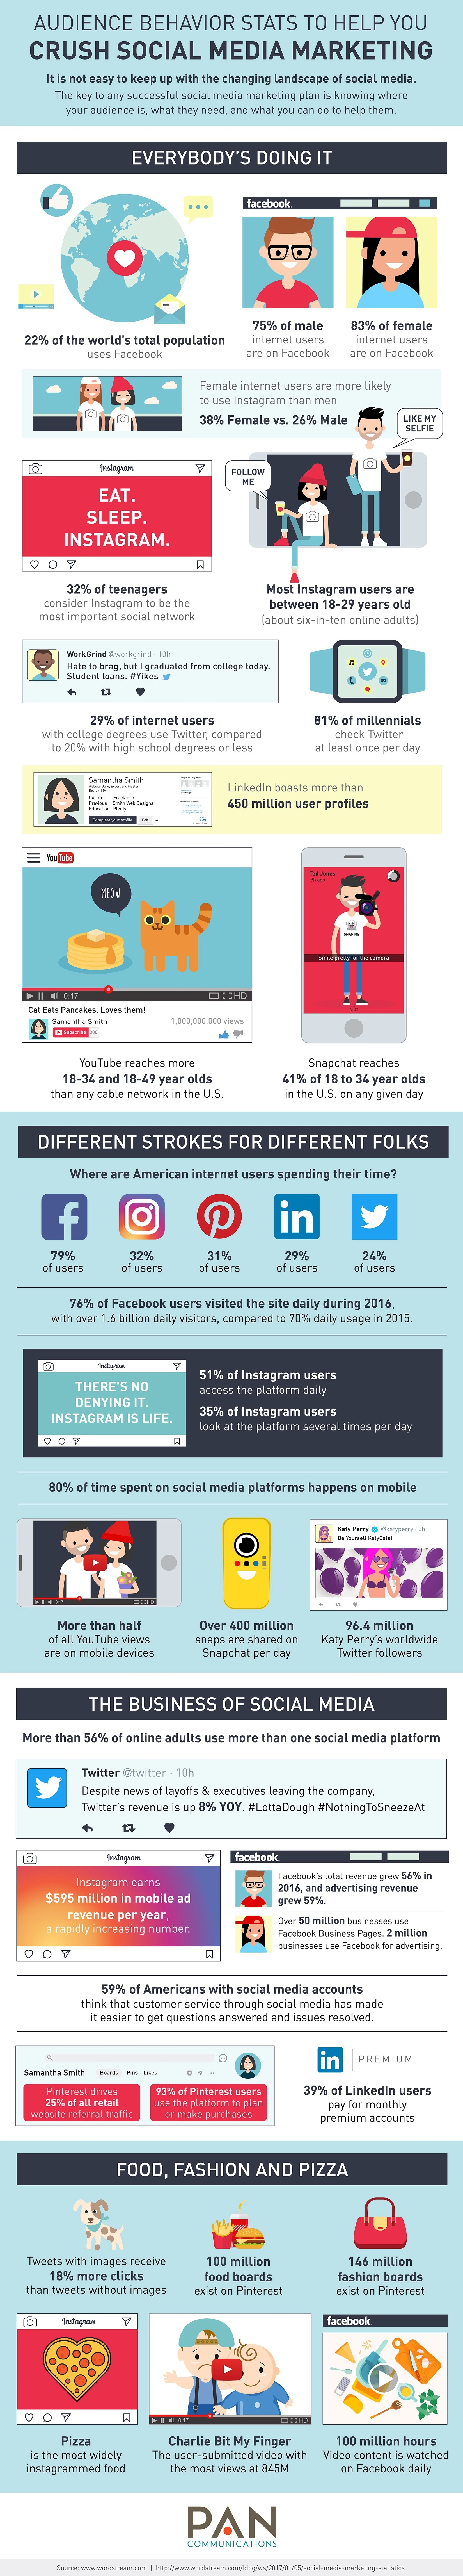 Audience Behavior Stats to Help You Crush Social Media Marketing - #infographic